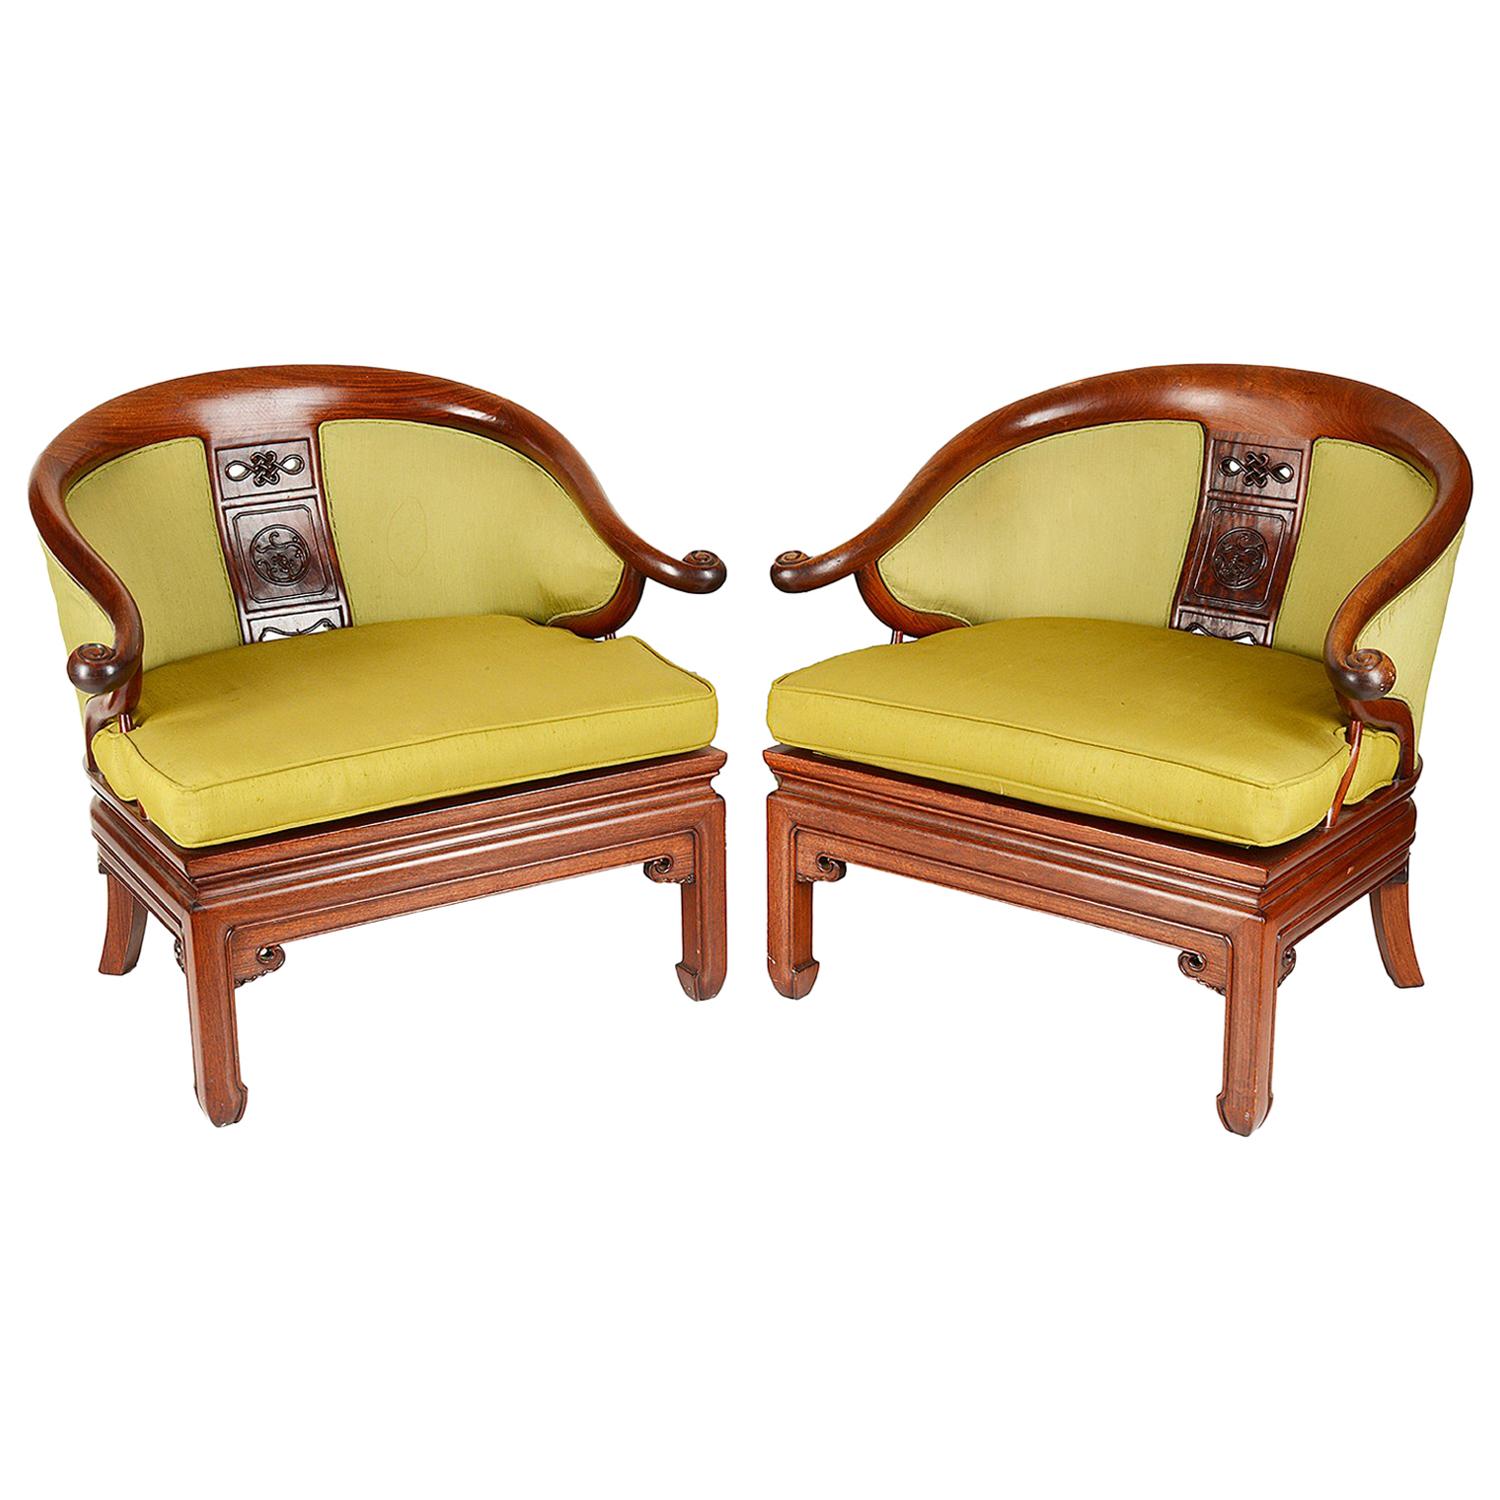 Pair of Chinese Horse Shoe Shaped Armchairs For Sale